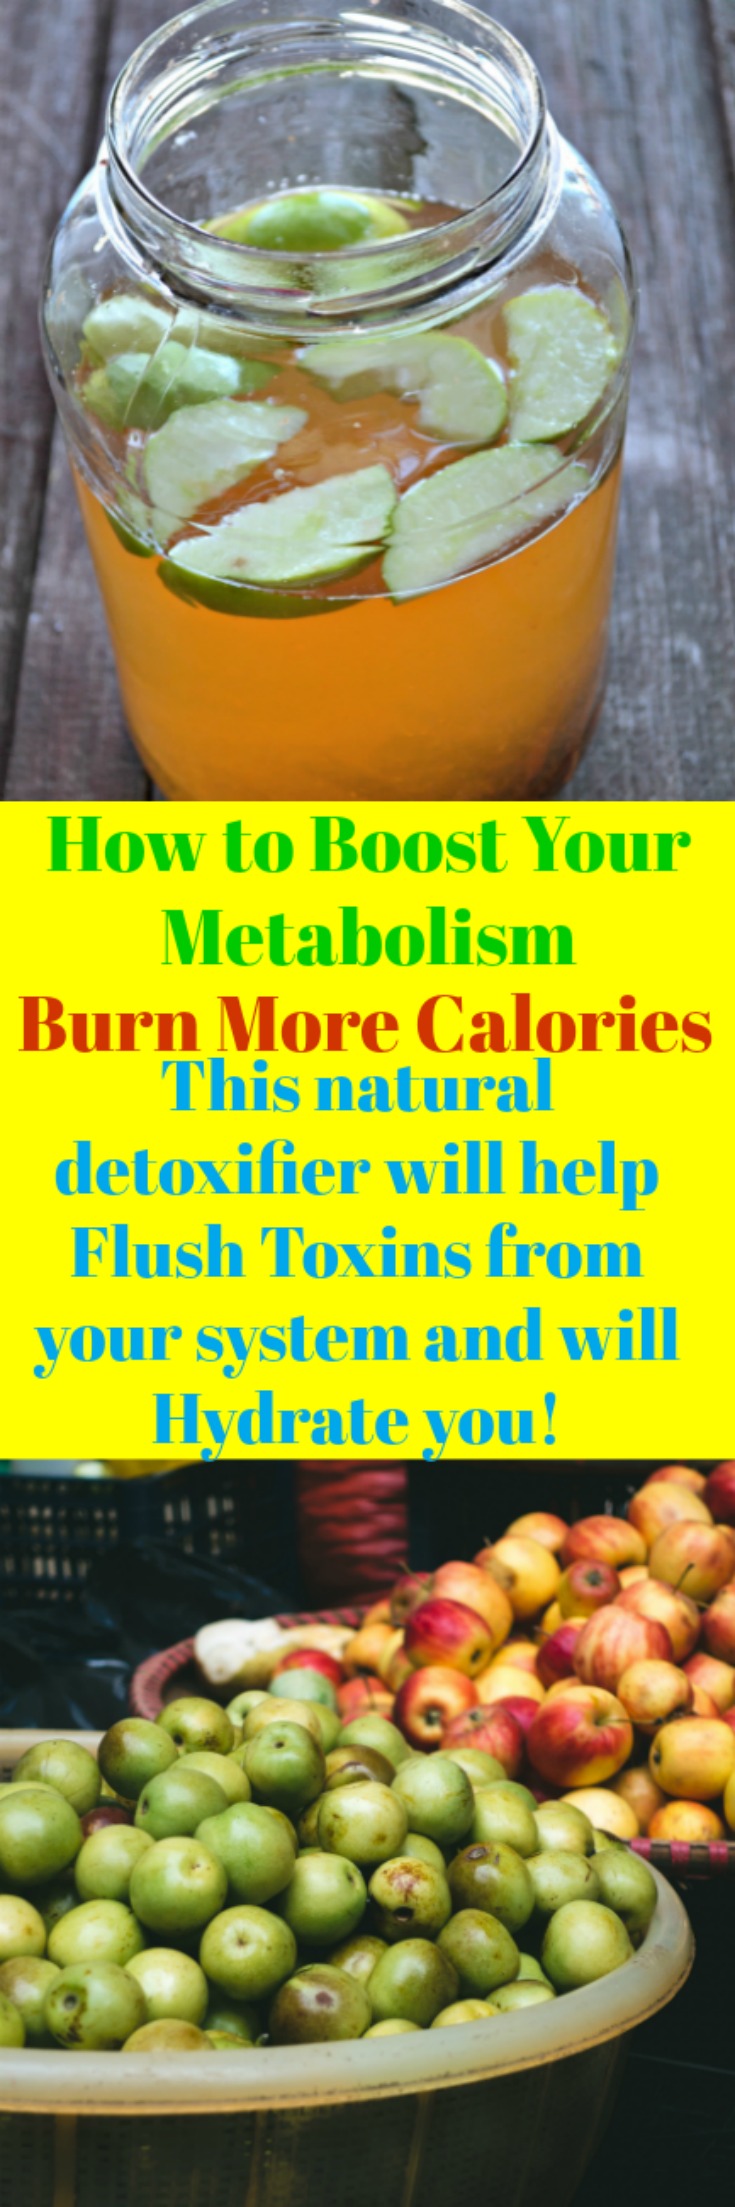 Apple Cinnamon Metabolism Detox Water to jump start your system into weight loss mode.  Speed up your metabolism and burn more calories which in turn make you feel amazingly remarkable. There is no magic pill for weight loss, just hard work and putting the right foods into your system like this drink!